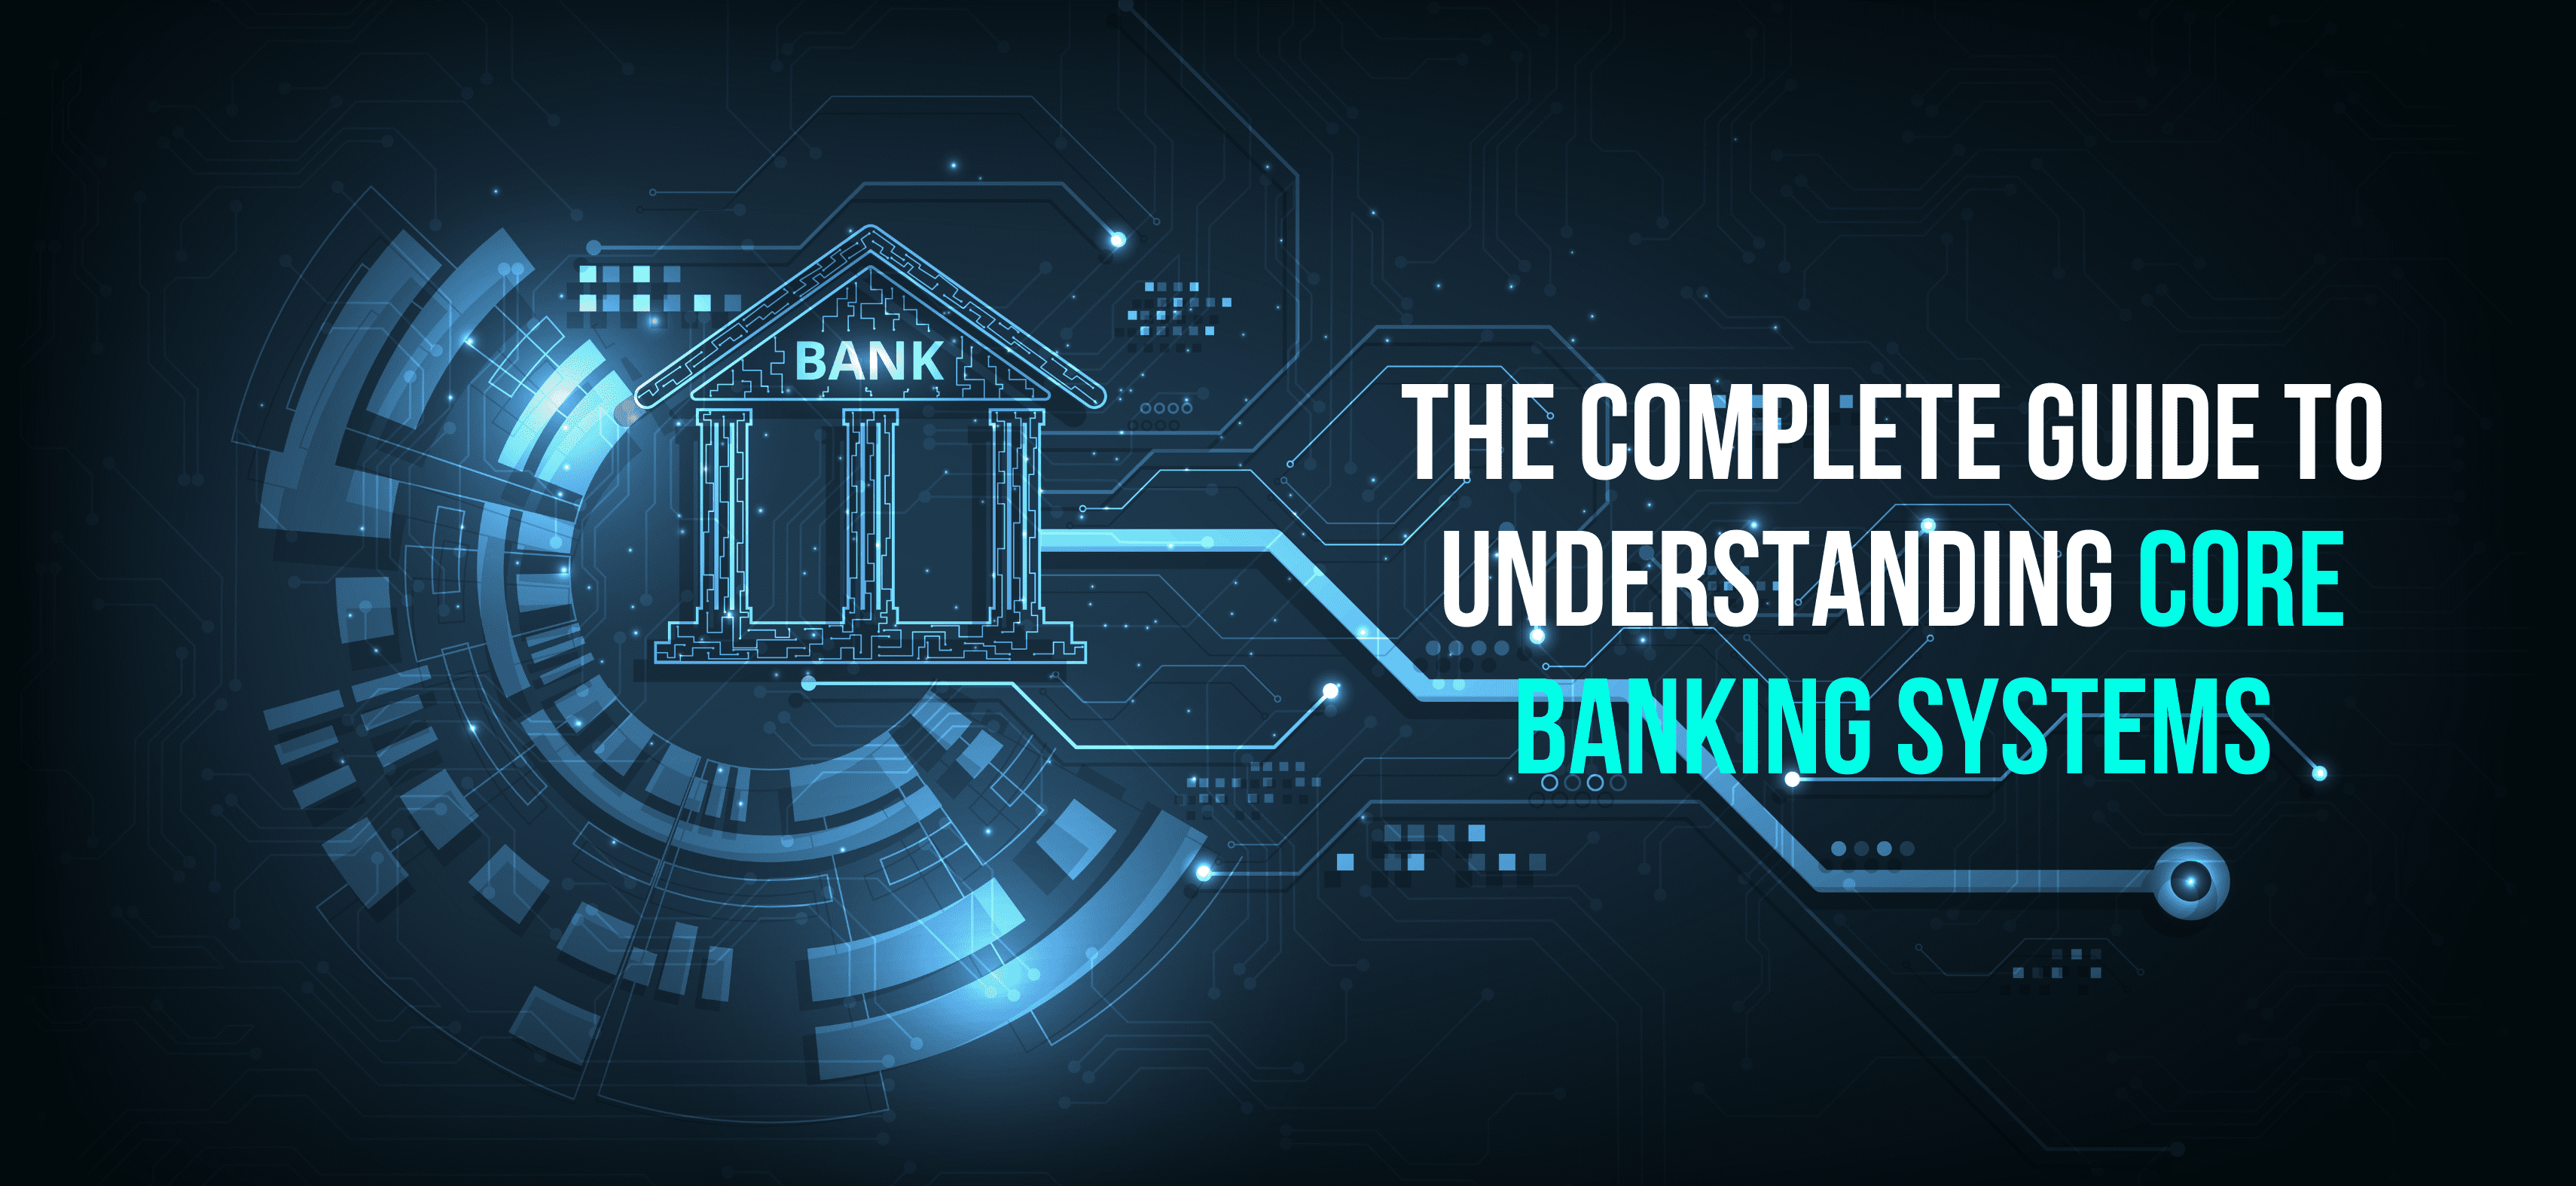 The Complete Guide to Understanding Core Banking Systems - Internet Soft